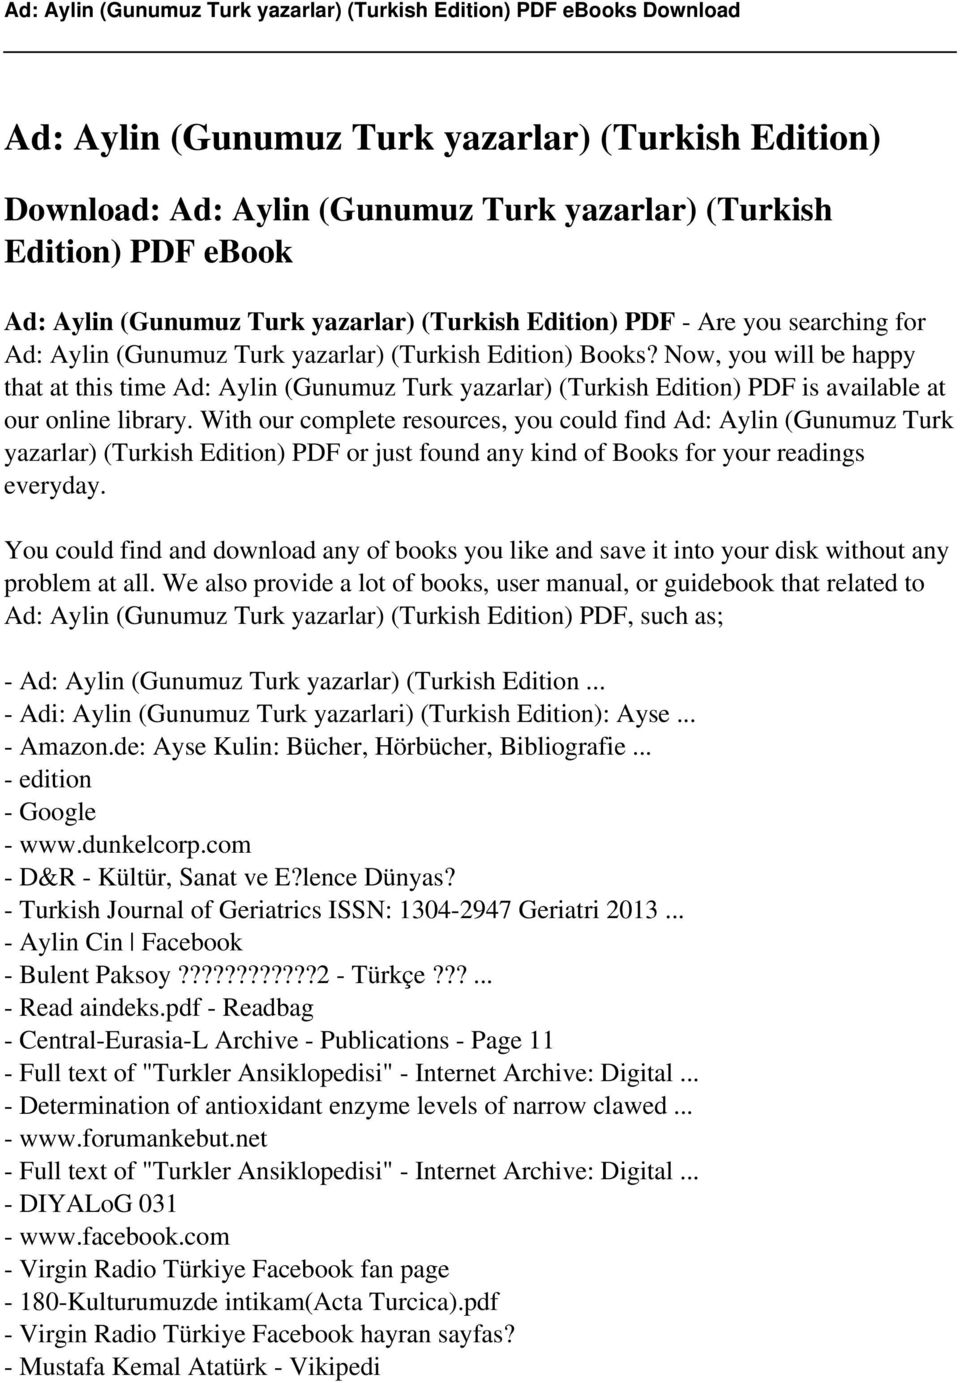 With our complete resources, you could find Ad: Aylin (Gunumuz Turk yazarlar) (Turkish Edition) PDF or just found any kind of Books for your readings everyday.